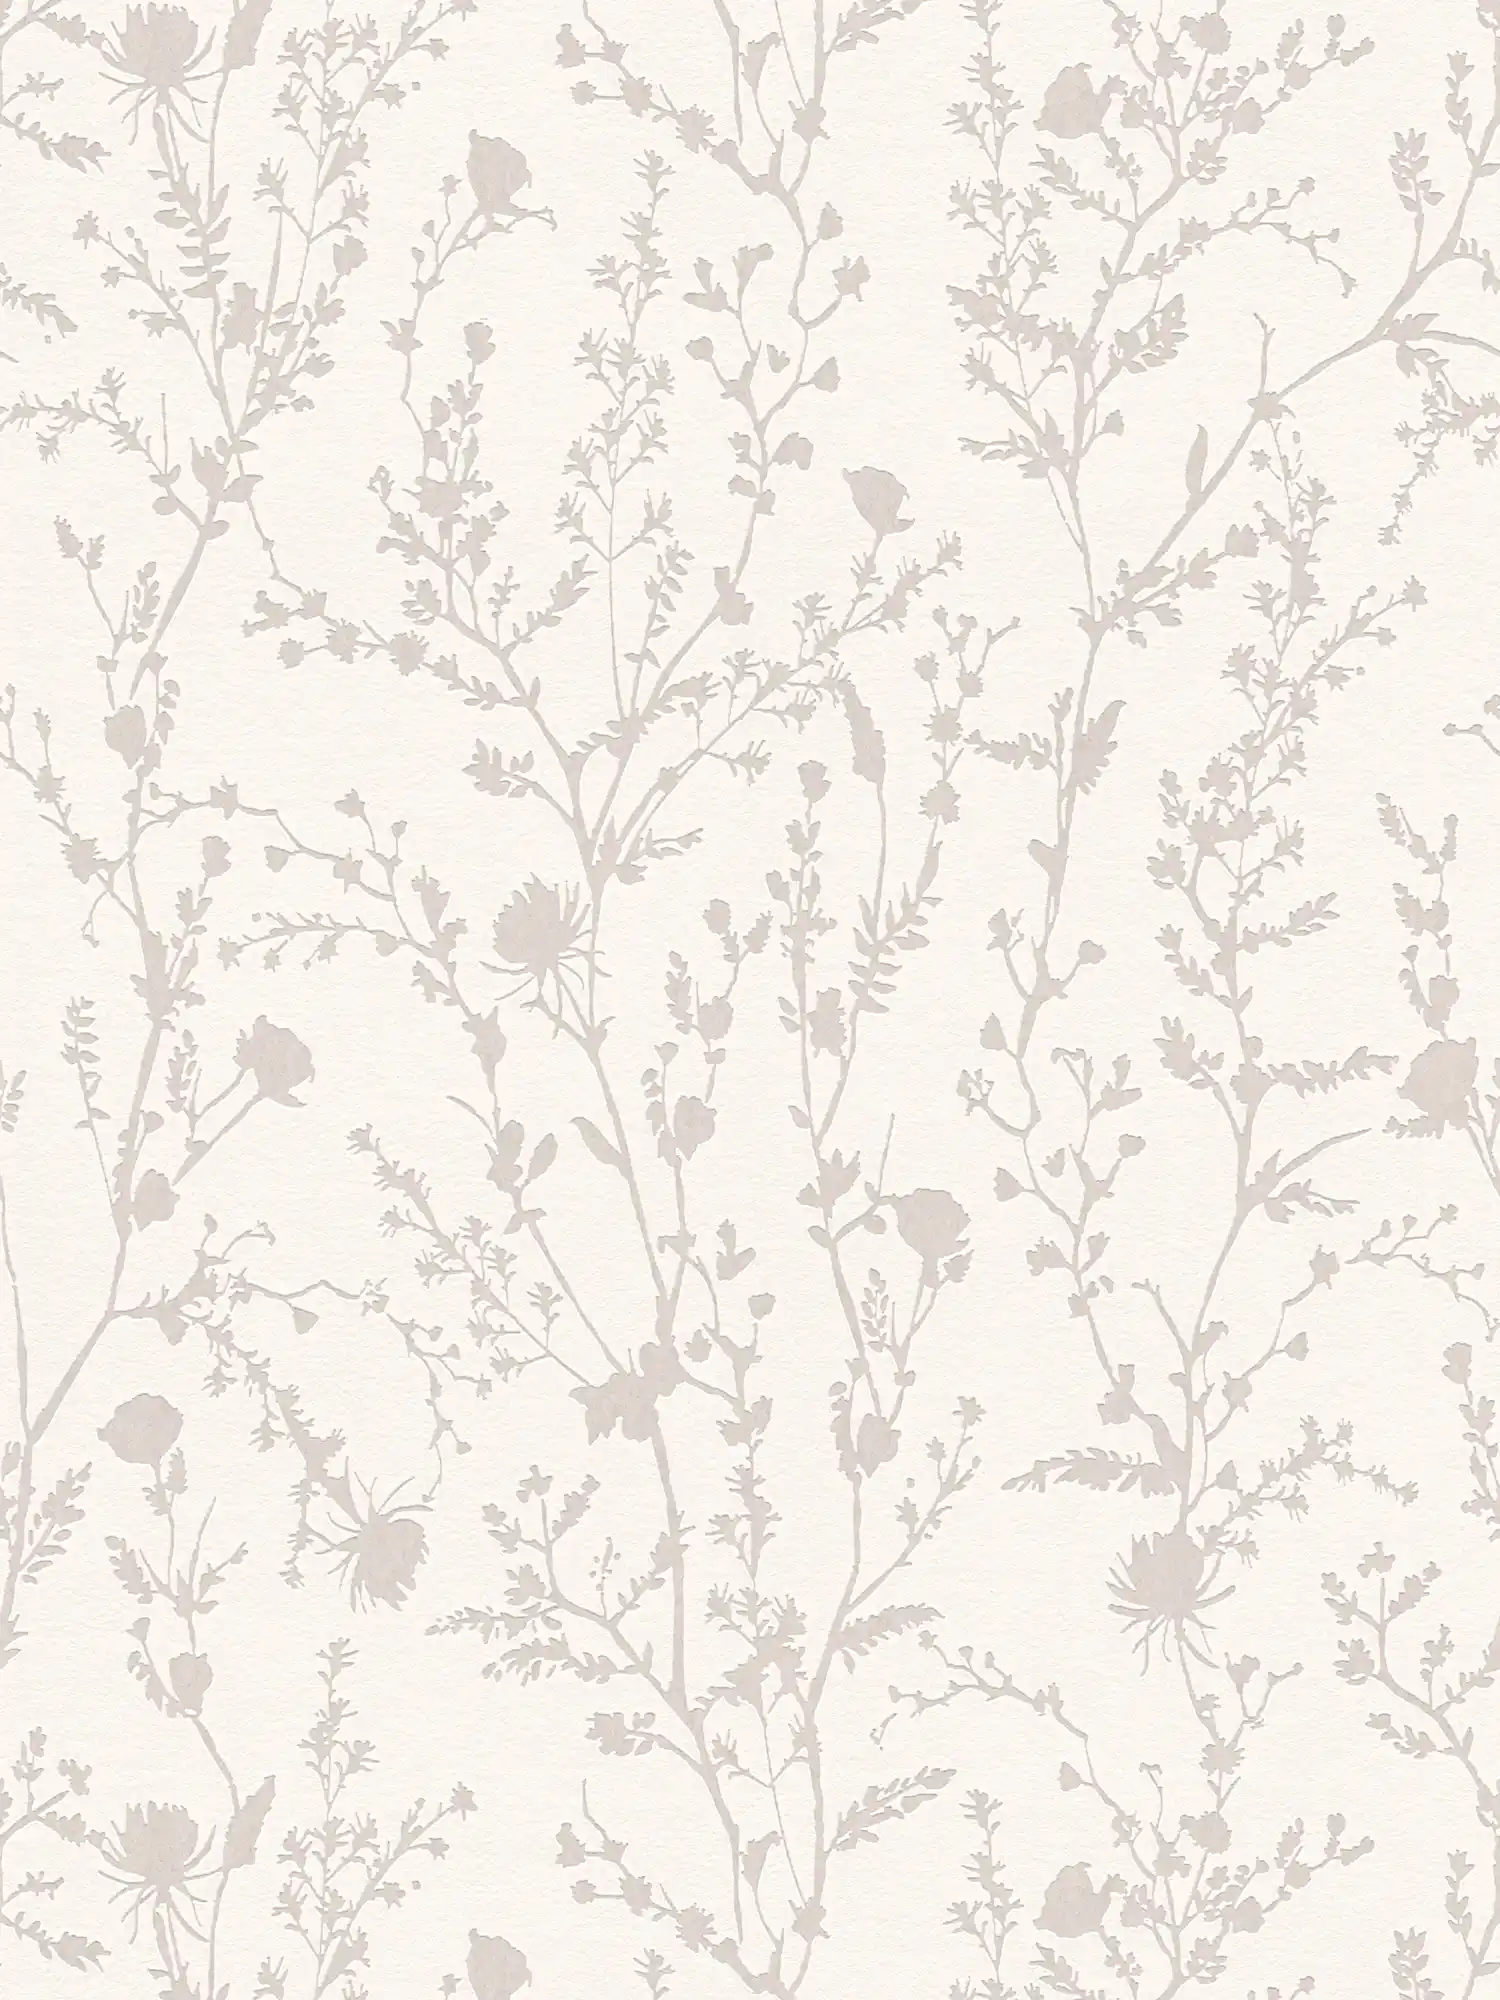 Non-woven wallpaper soft grasses and floral pattern - white, grey
